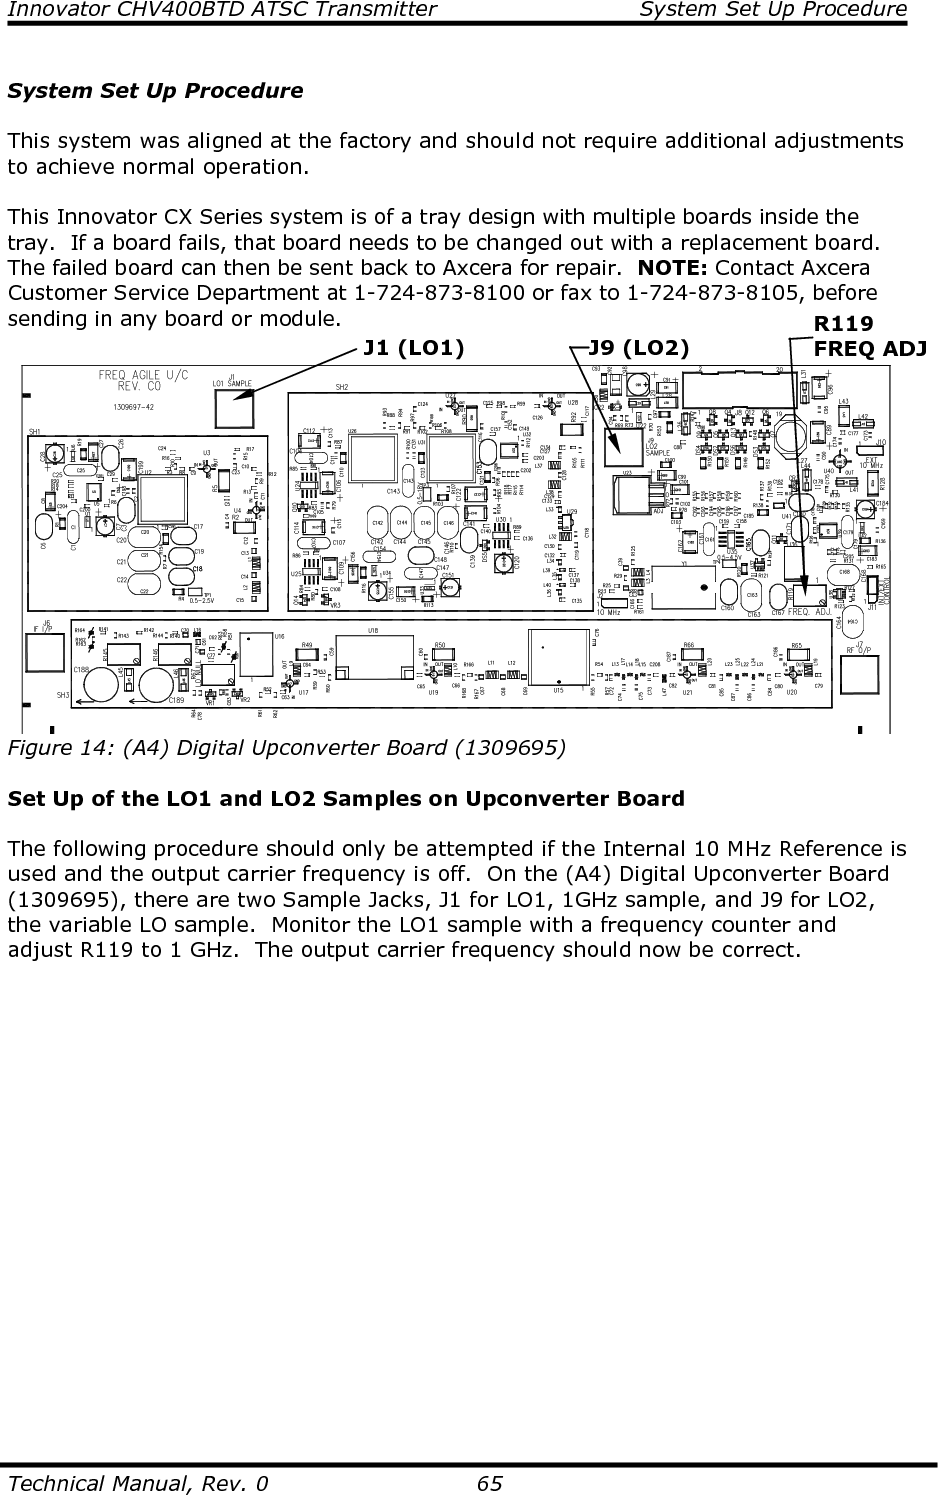 Innovator CHV400BTD ATSC Transmitter  System Set Up Procedure  Technical Manual, Rev. 0    65  System Set Up Procedure  This system was aligned at the factory and should not require additional adjustments to achieve normal operation.  This Innovator CX Series system is of a tray design with multiple boards inside the tray.  If a board fails, that board needs to be changed out with a replacement board.  The failed board can then be sent back to Axcera for repair.  NOTE: Contact Axcera Customer Service Department at 1-724-873-8100 or fax to 1-724-873-8105, before sending in any board or module.   Figure 14: (A4) Digital Upconverter Board (1309695)  Set Up of the LO1 and LO2 Samples on Upconverter Board  The following procedure should only be attempted if the Internal 10 MHz Reference is used and the output carrier frequency is off.  On the (A4) Digital Upconverter Board (1309695), there are two Sample Jacks, J1 for LO1, 1GHz sample, and J9 for LO2, the variable LO sample.  Monitor the LO1 sample with a frequency counter and adjust R119 to 1 GHz.  The output carrier frequency should now be correct.  J1 (LO1) J9 (LO2) R119 FREQ ADJ 